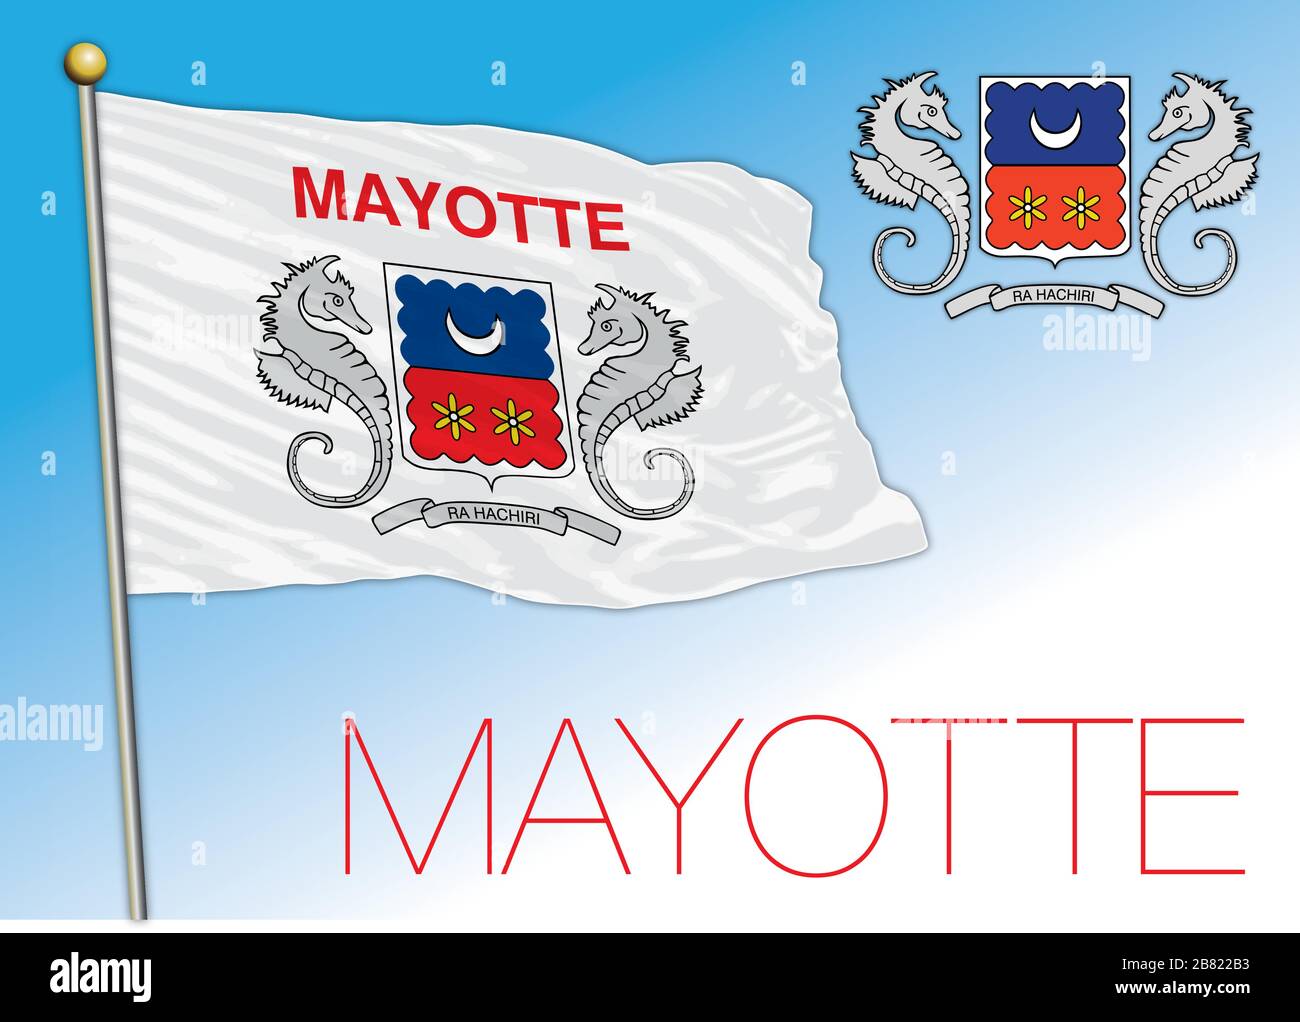 Mayotte official national flag and coat of arms, French territory